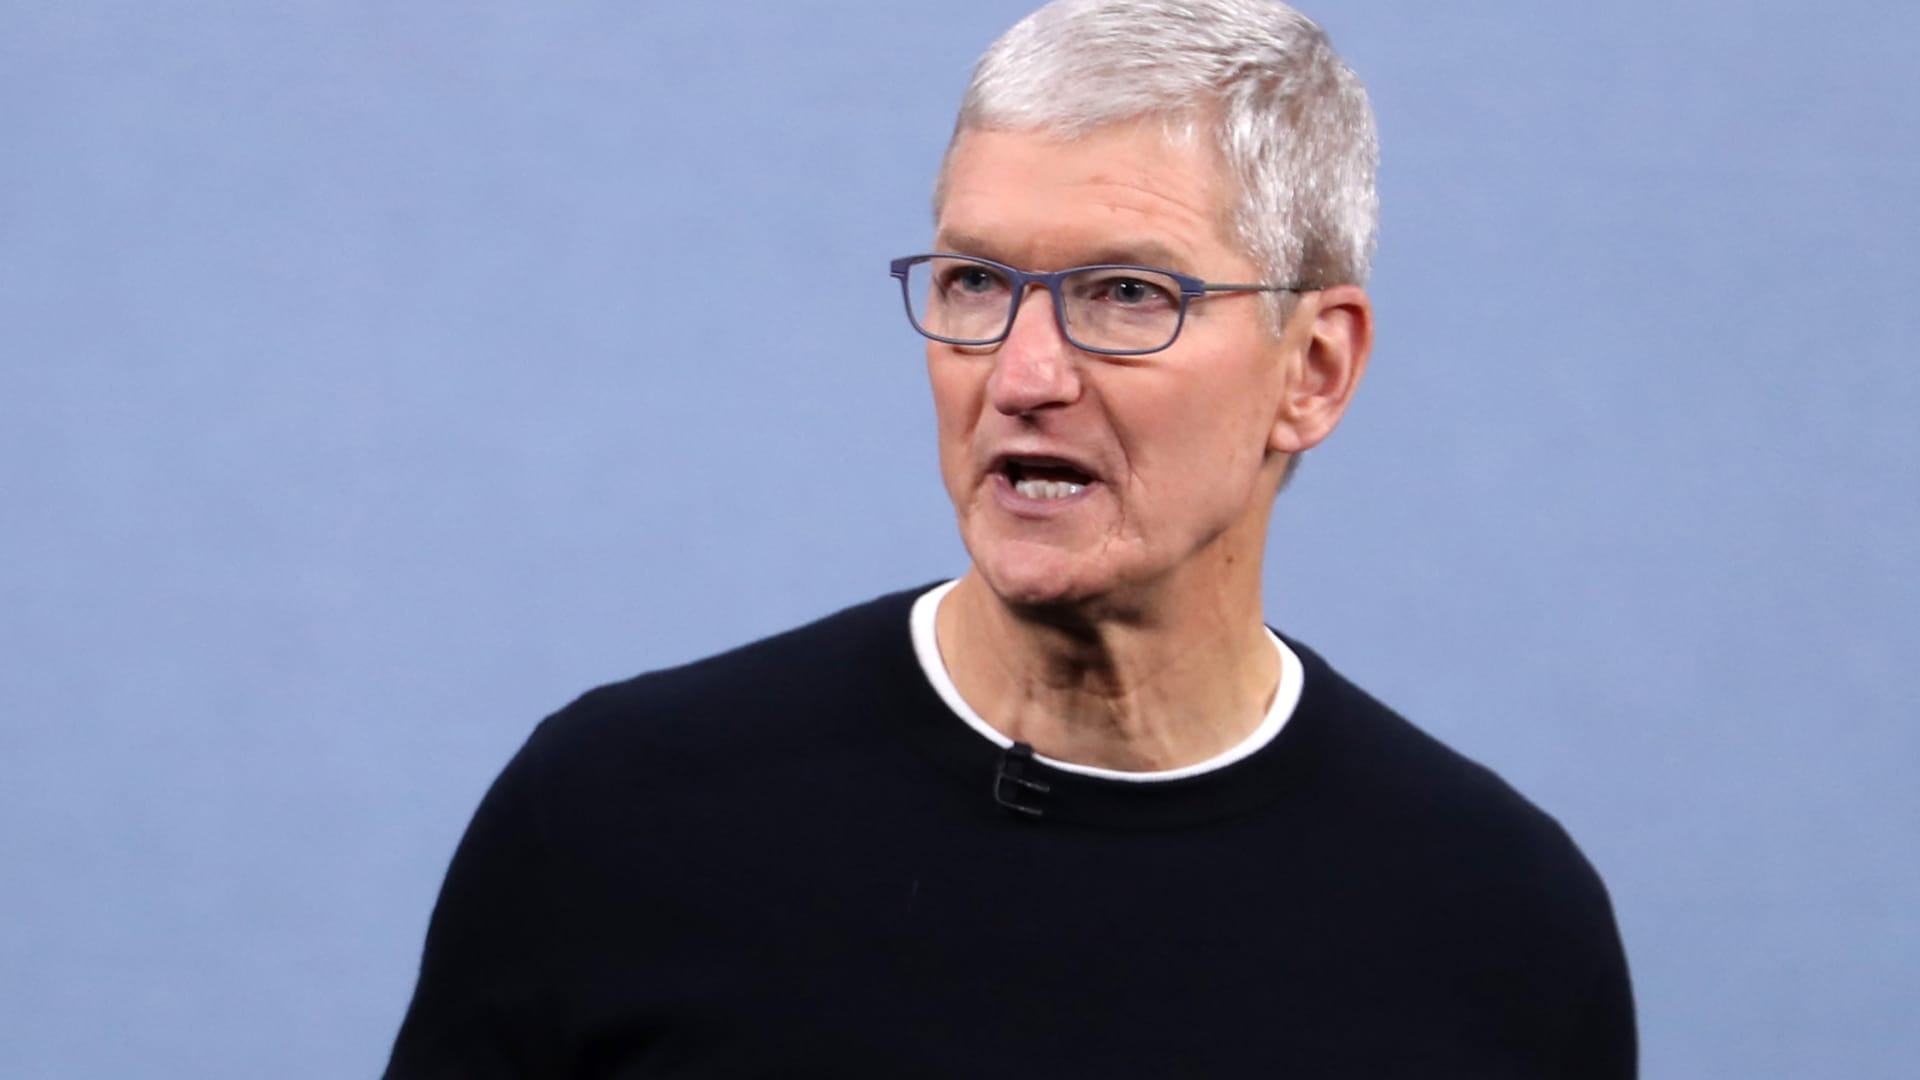 Apple CEO Tim Cook delivers the keynote address during a special event on September 10, 2019 in the Steve Jobs Theater on Apple's Cupertino, California campus.